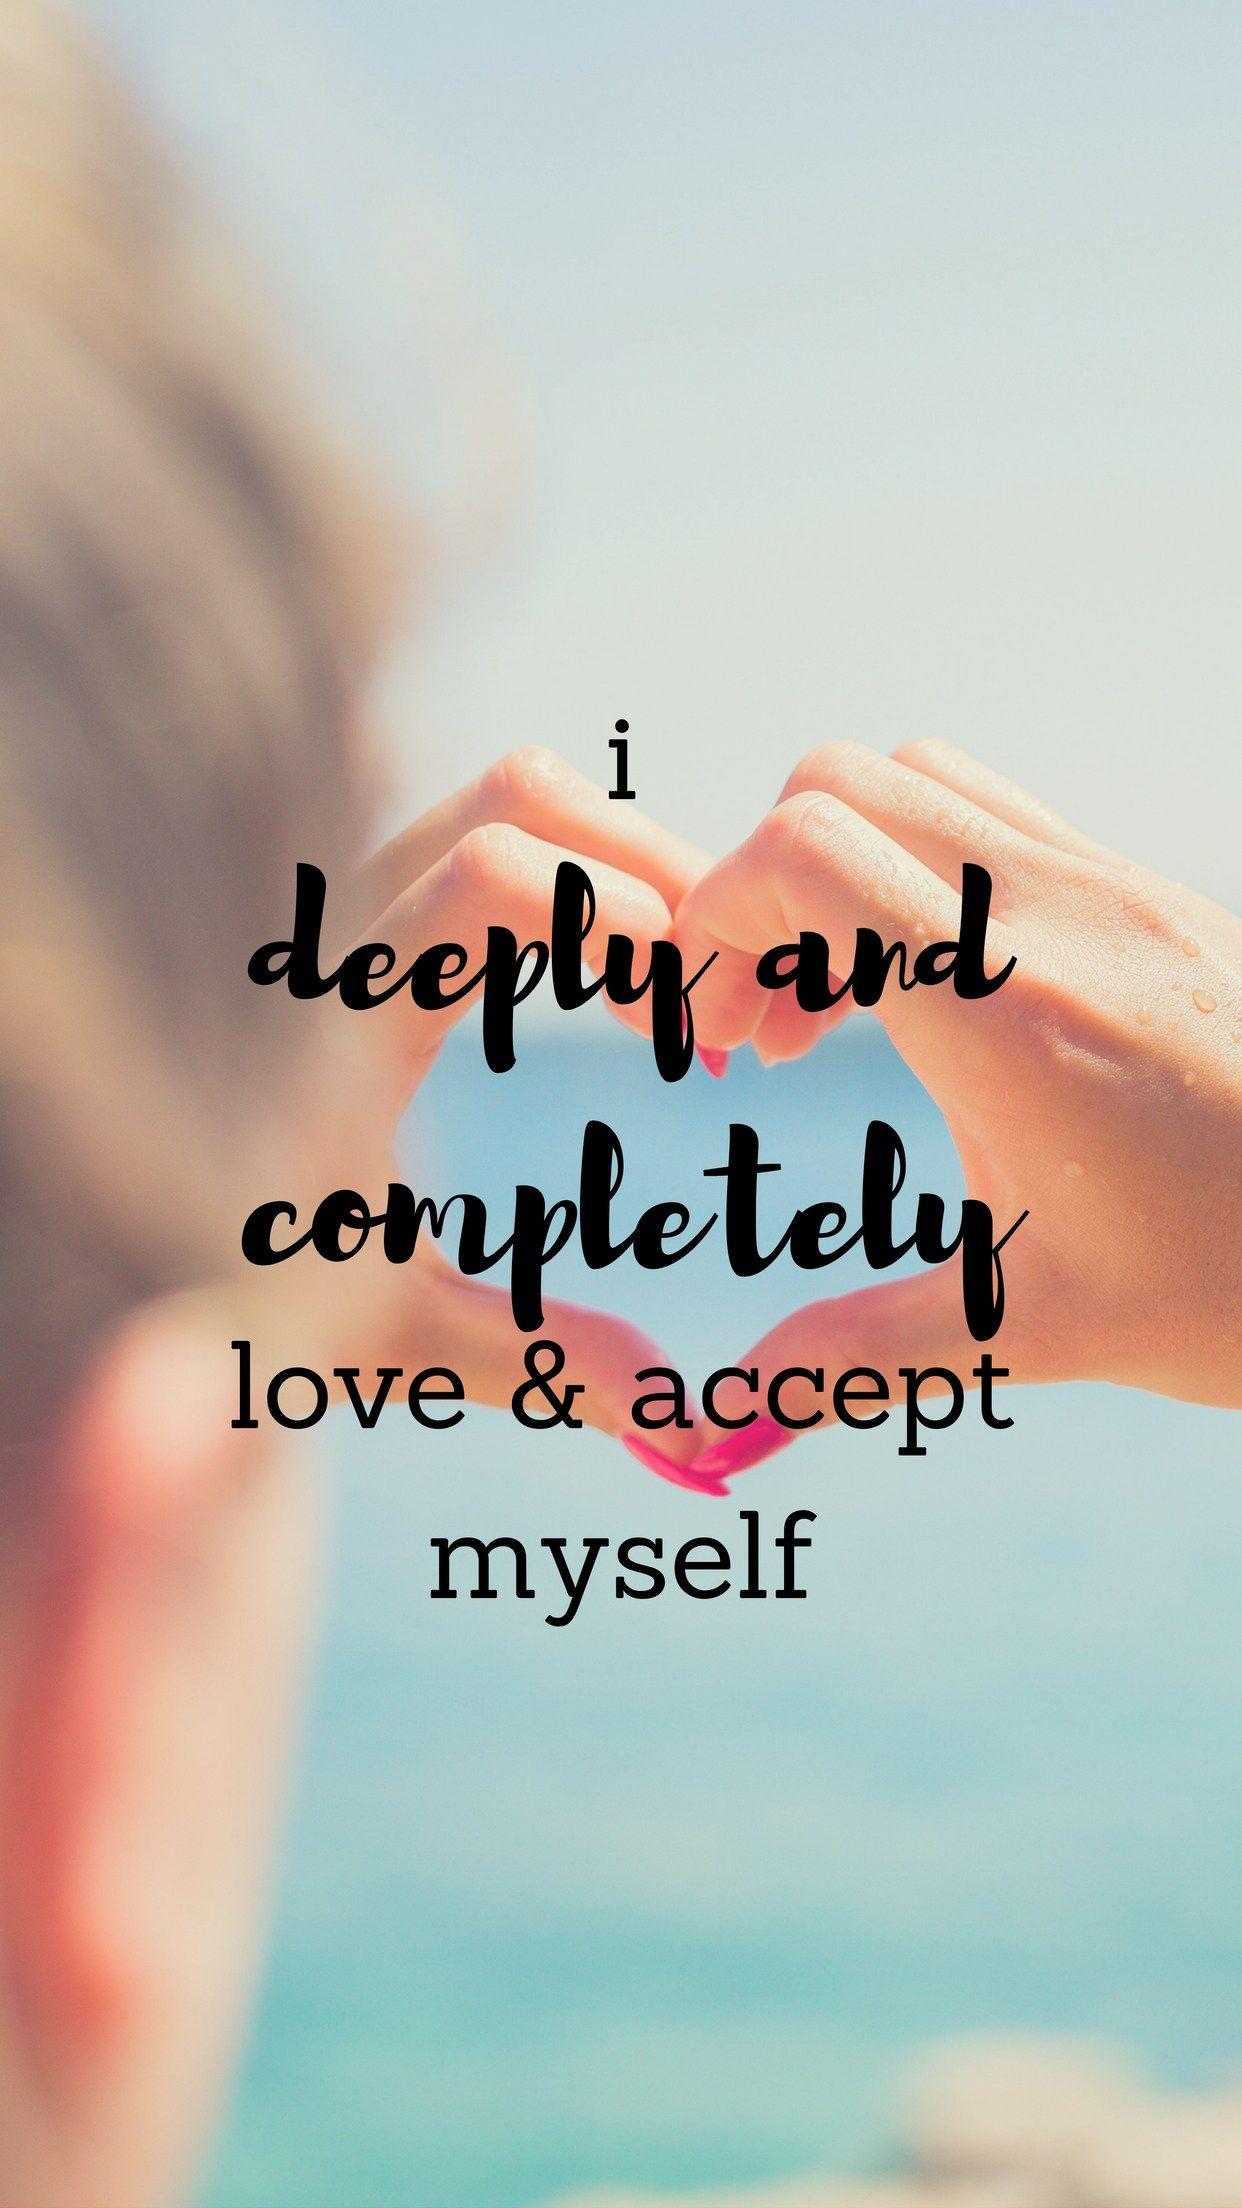 Love Myself Wallpapers Top Free Love Myself Backgrounds Wallpaperaccess